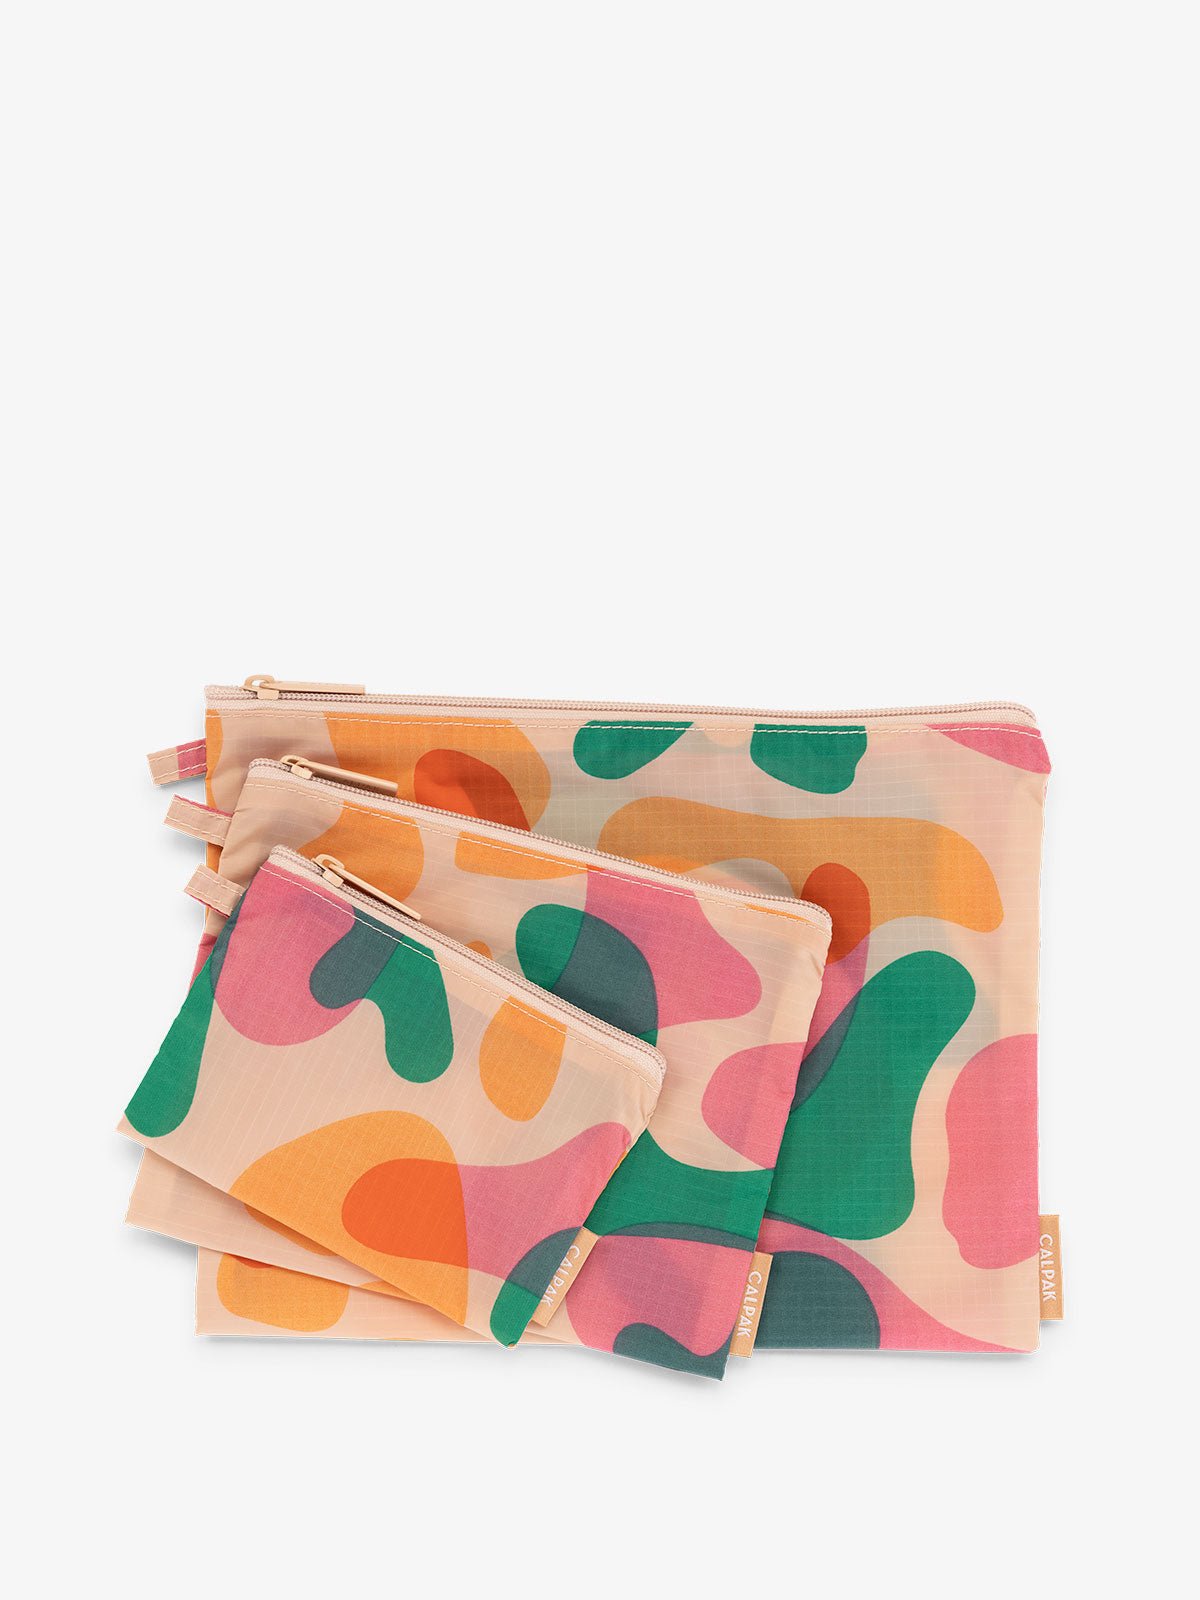 CALPAK Compakt zippered pouches in modern abstract